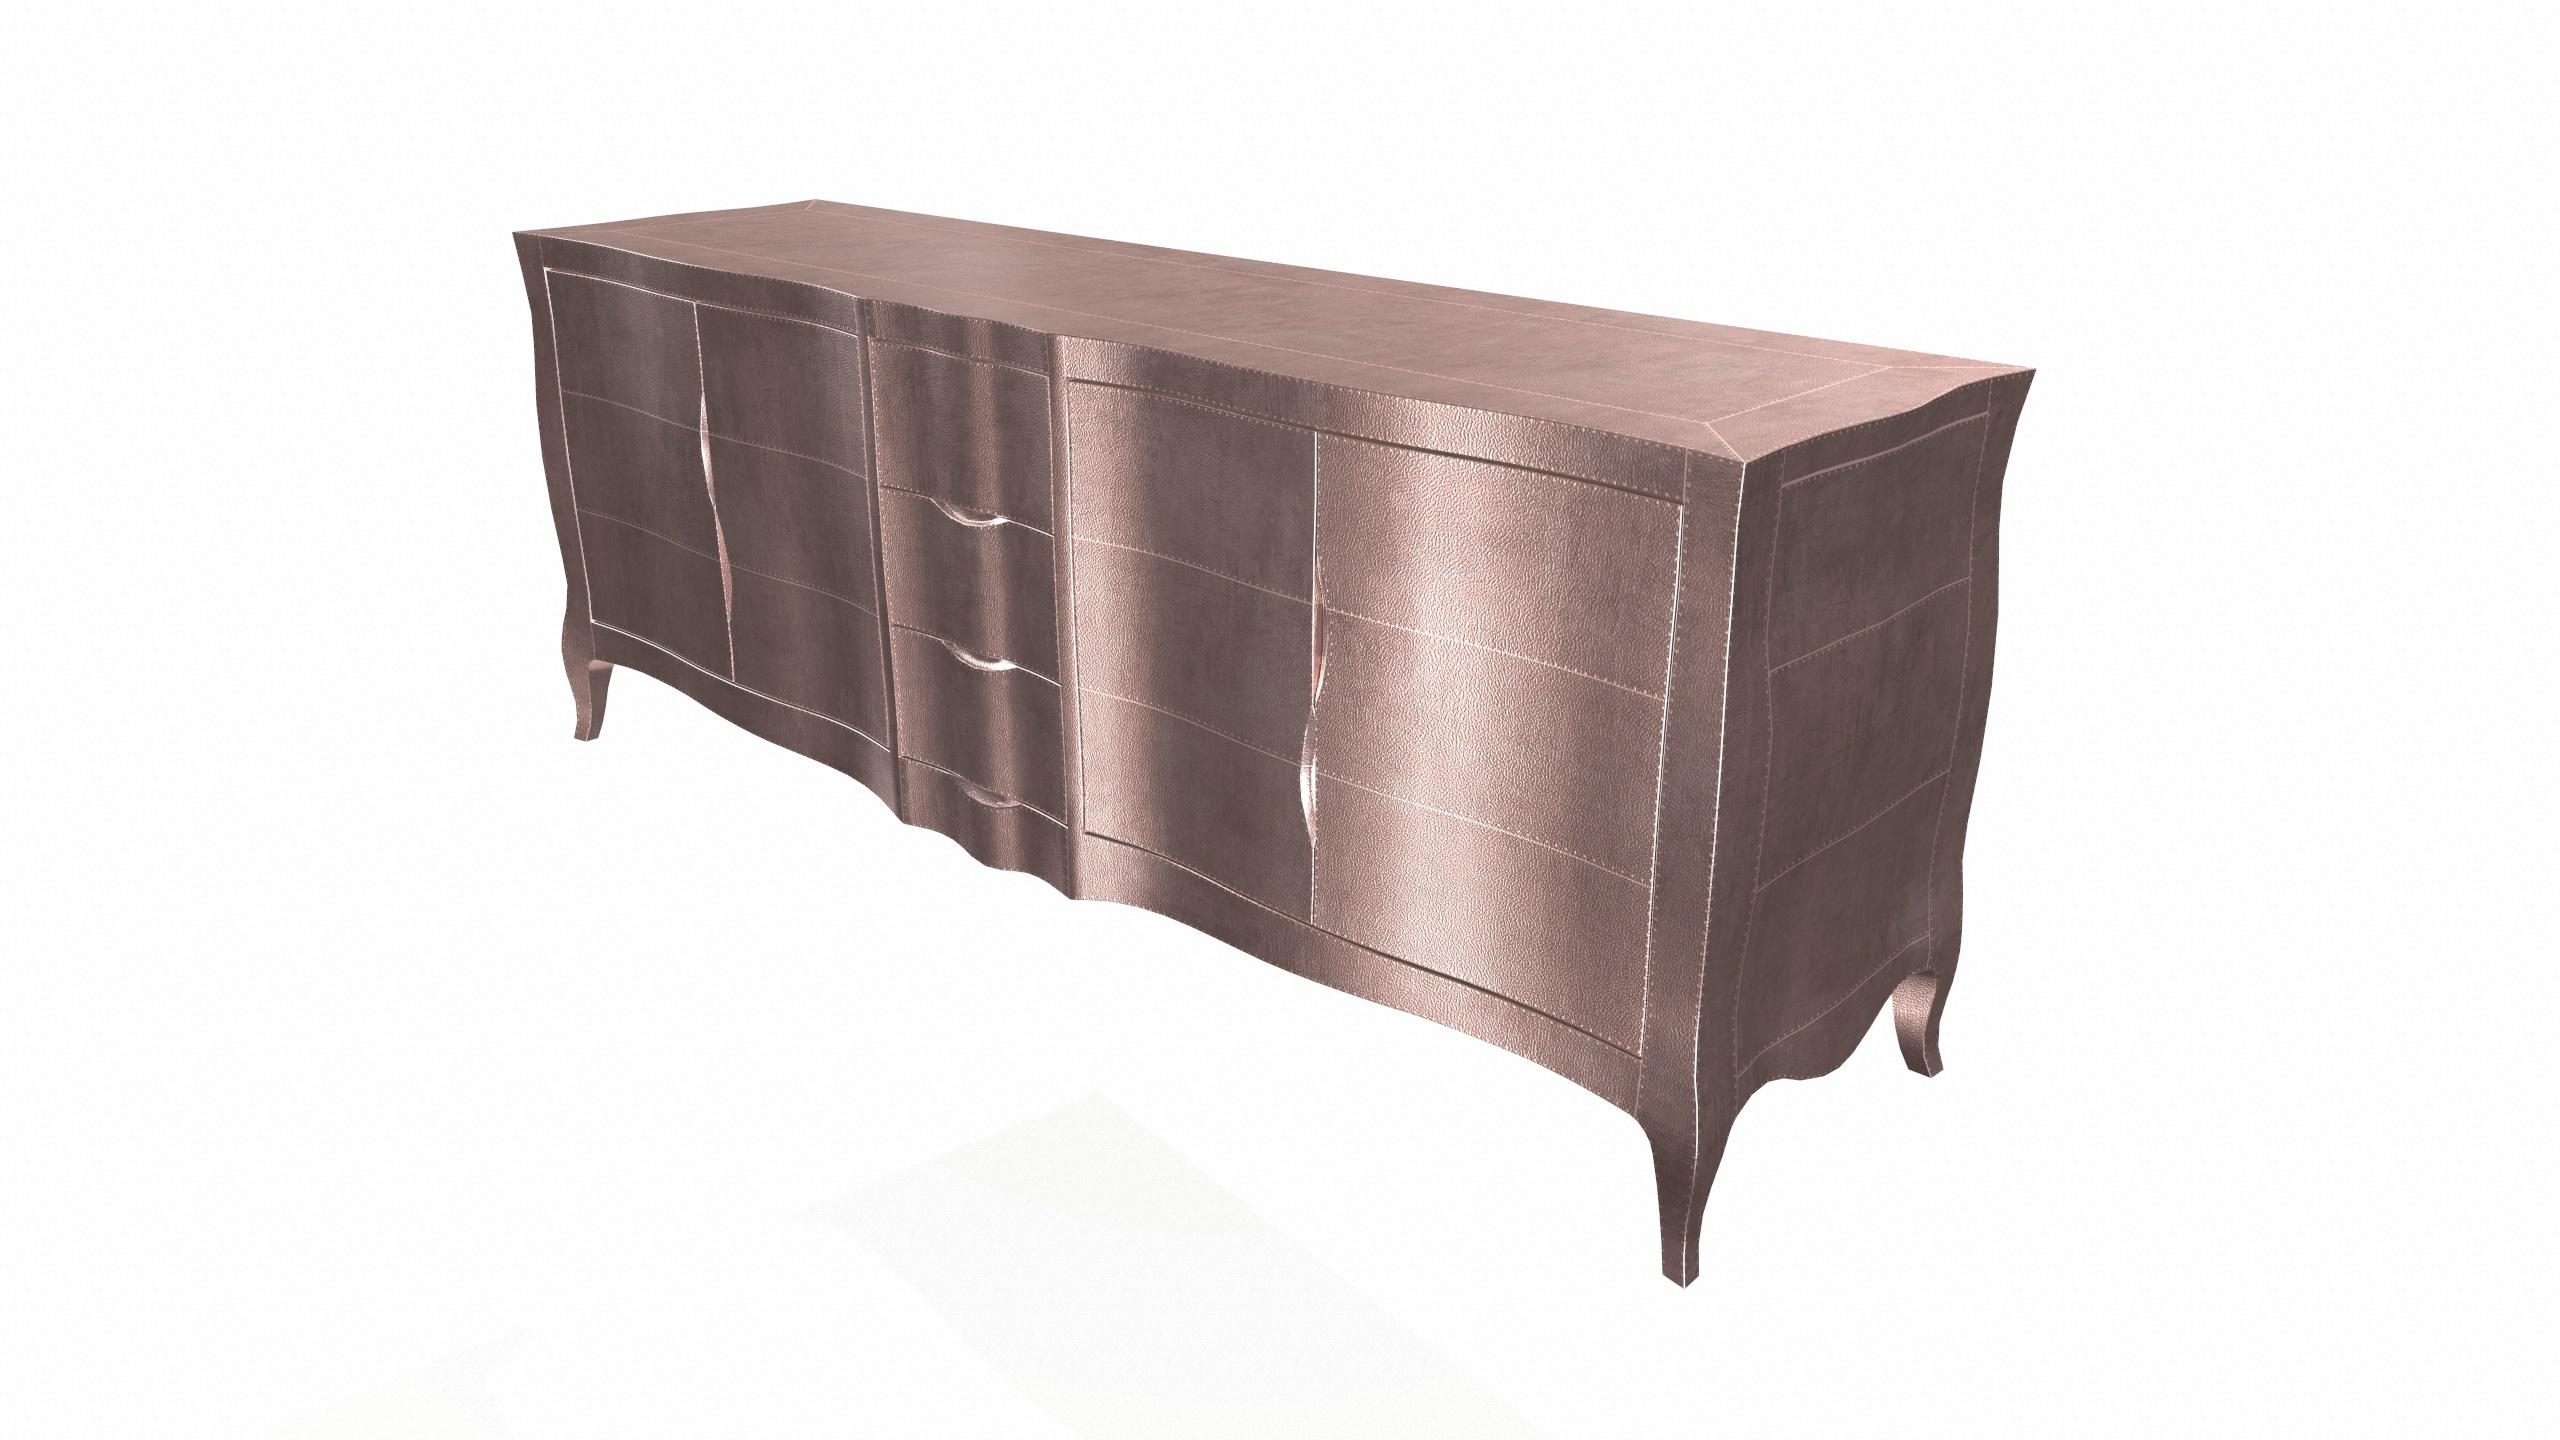 American Louise Credenza Art Deco Dressers in Fine Hammered Copper by Paul Mathieu For Sale